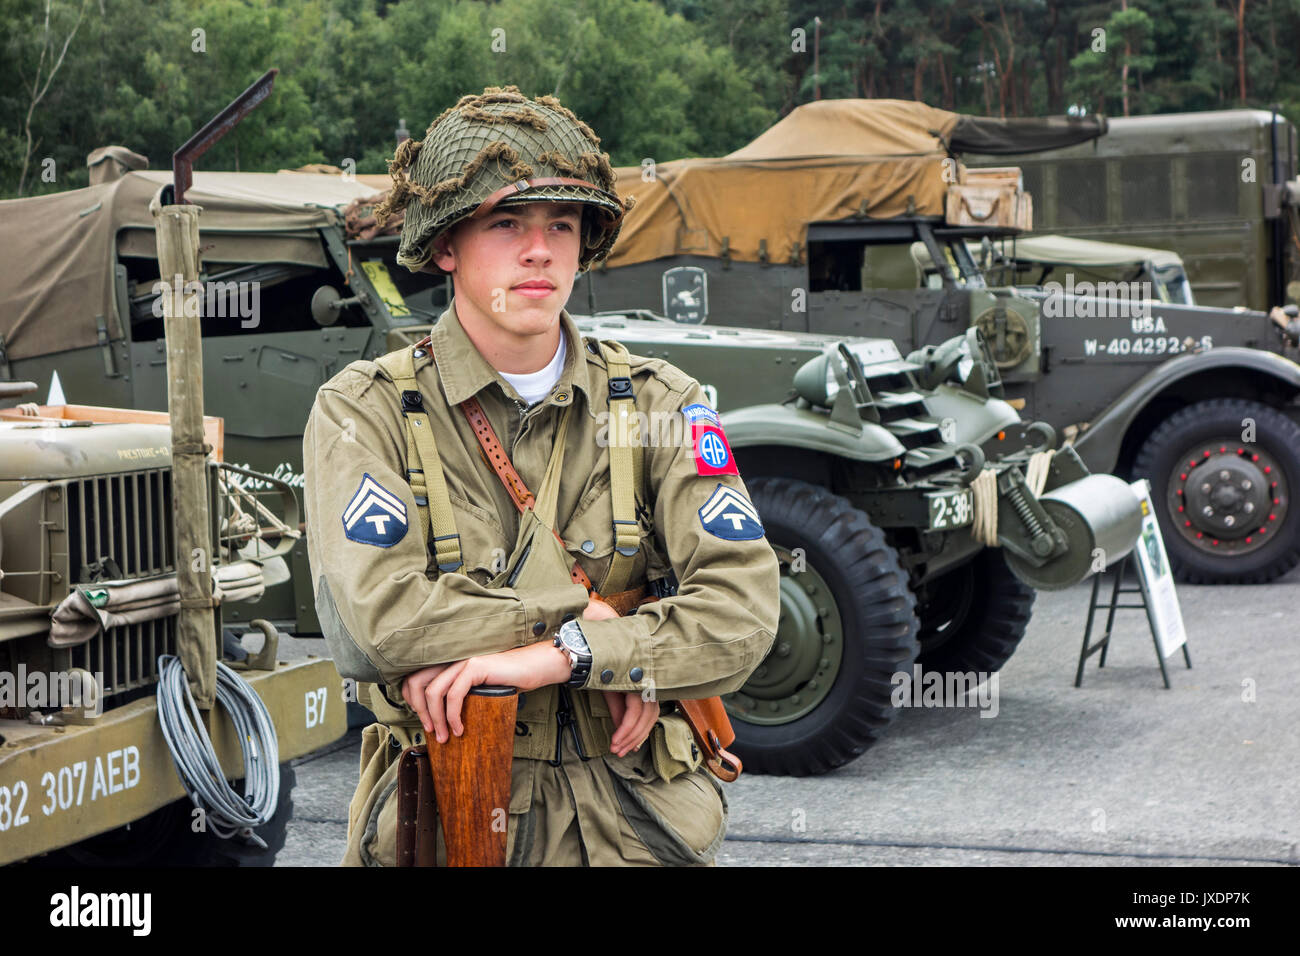 Young re-enactor posing in WW2 US Airborne uniform with Technician/5th  Grade Rank Badge in front of American World War Two trucks at militaria  fair Stock Photo - Alamy